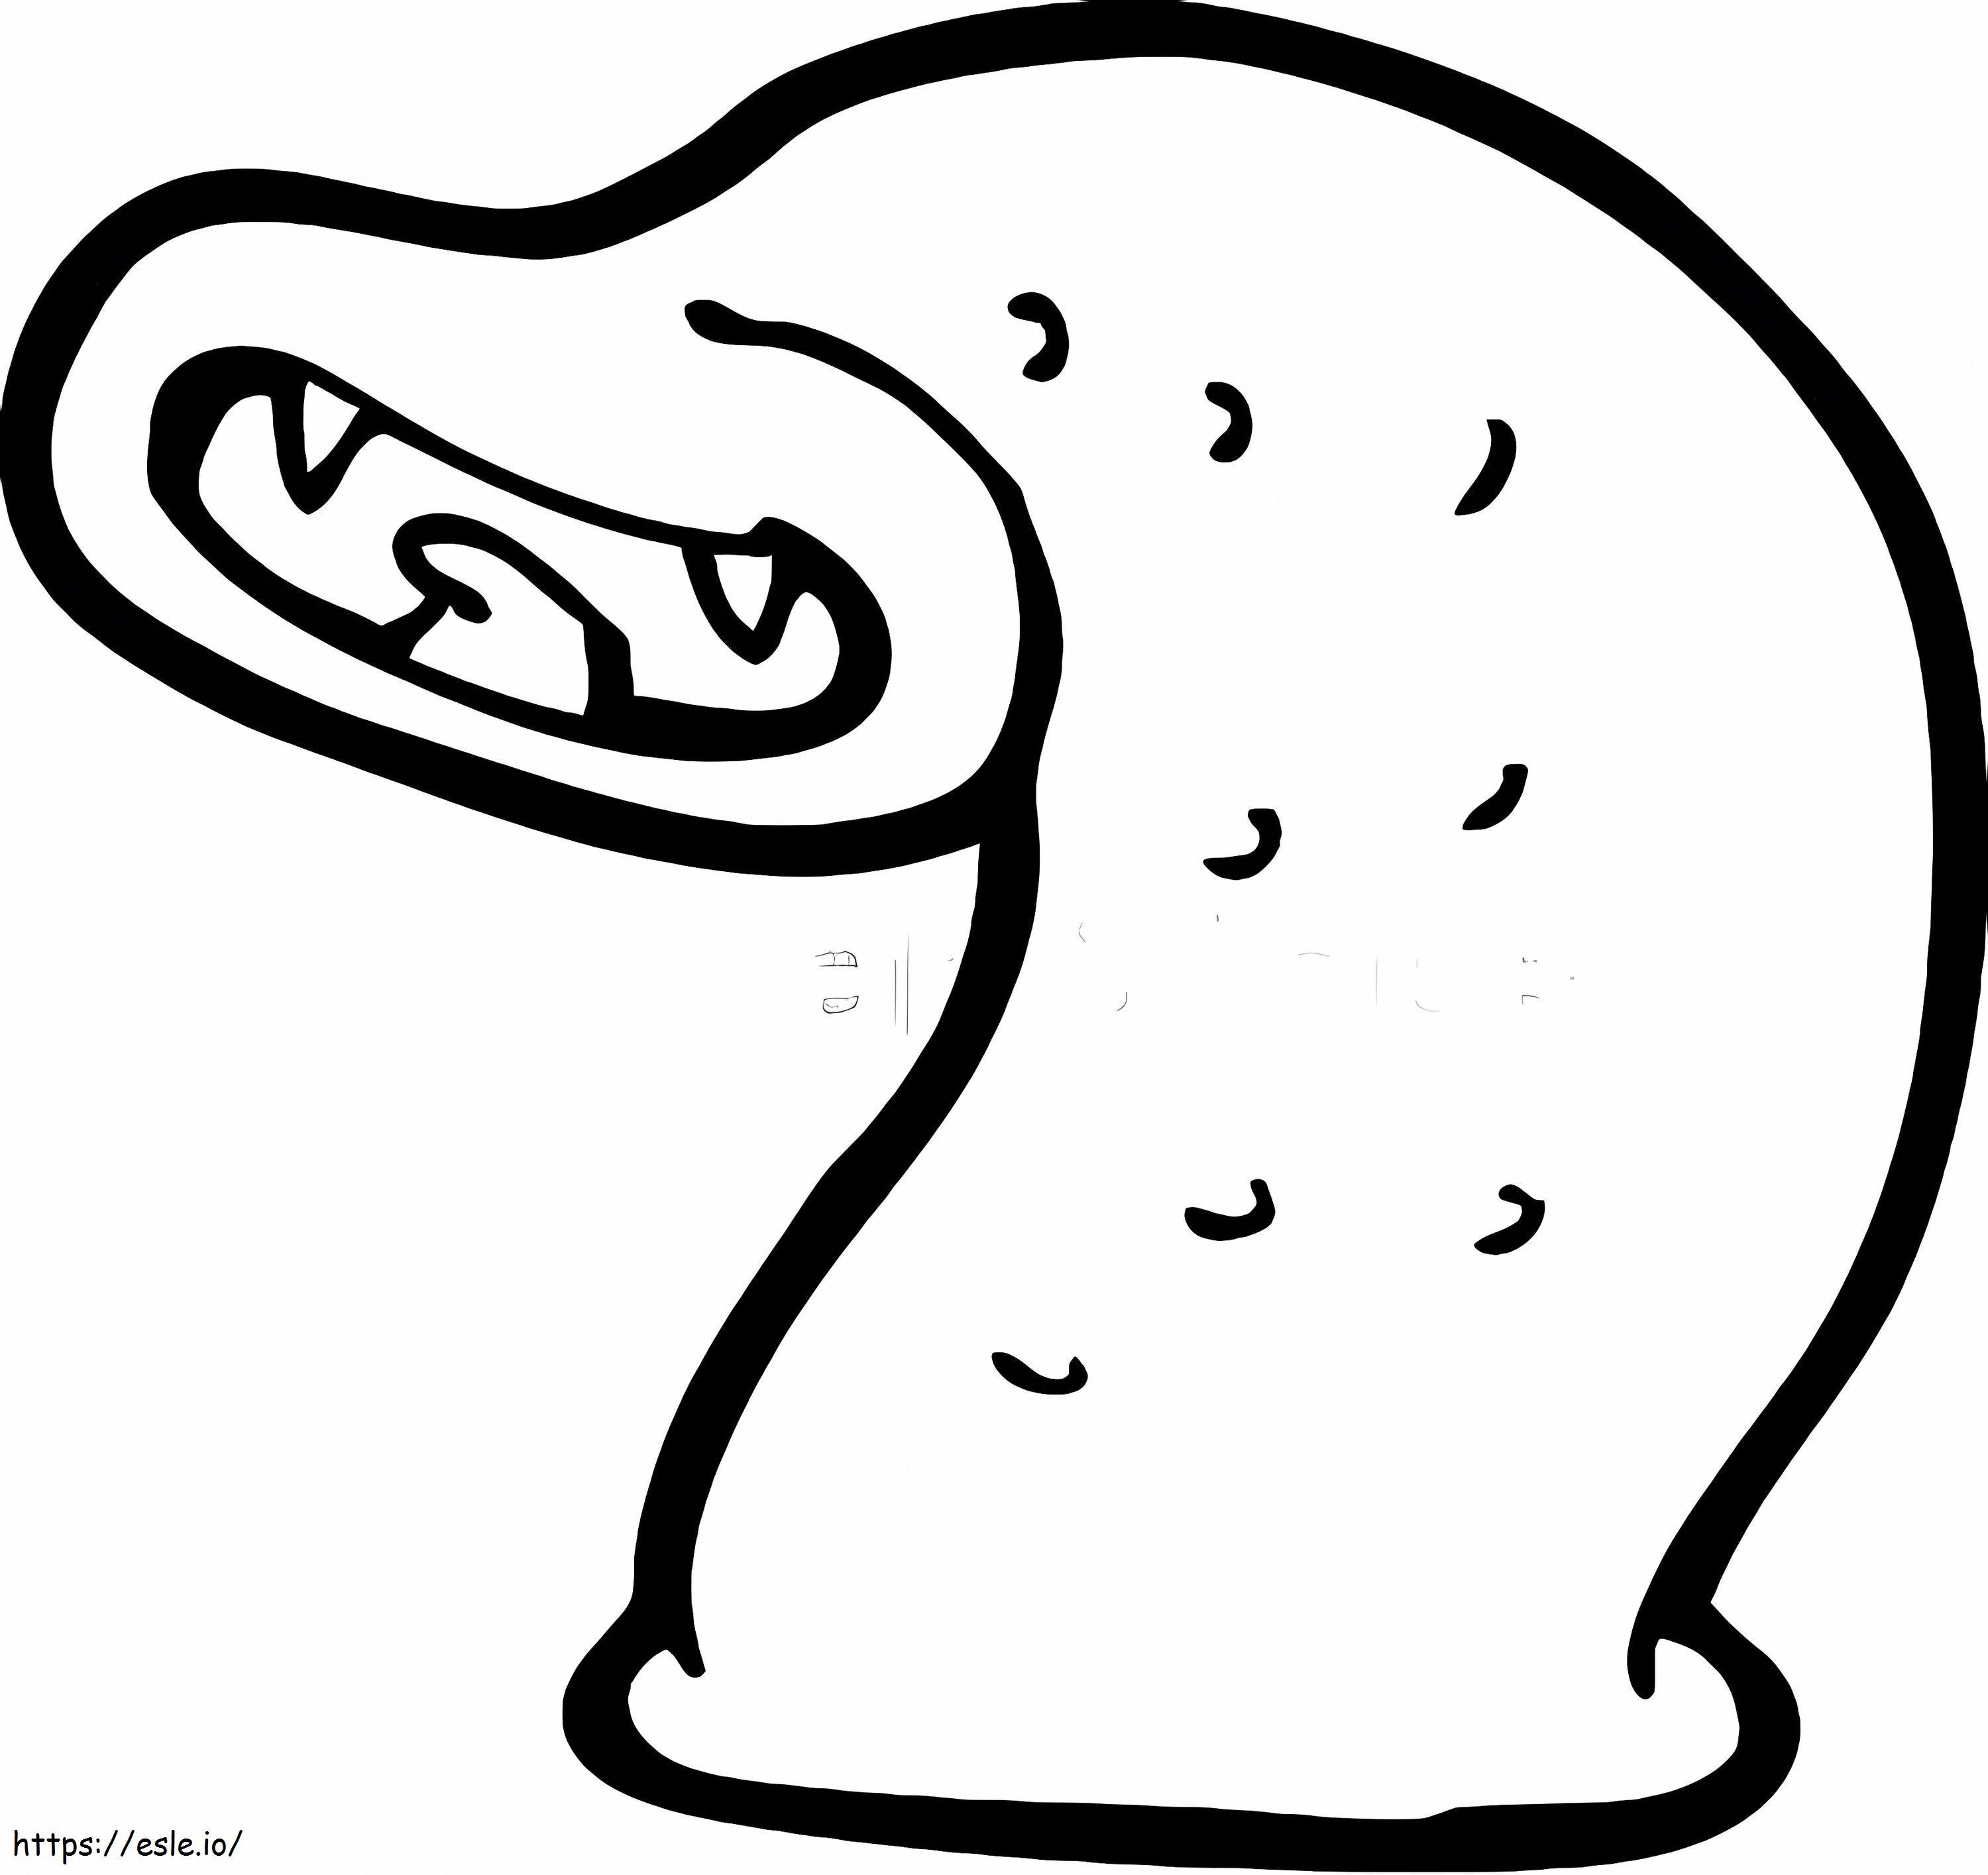 Leech Smiling coloring page